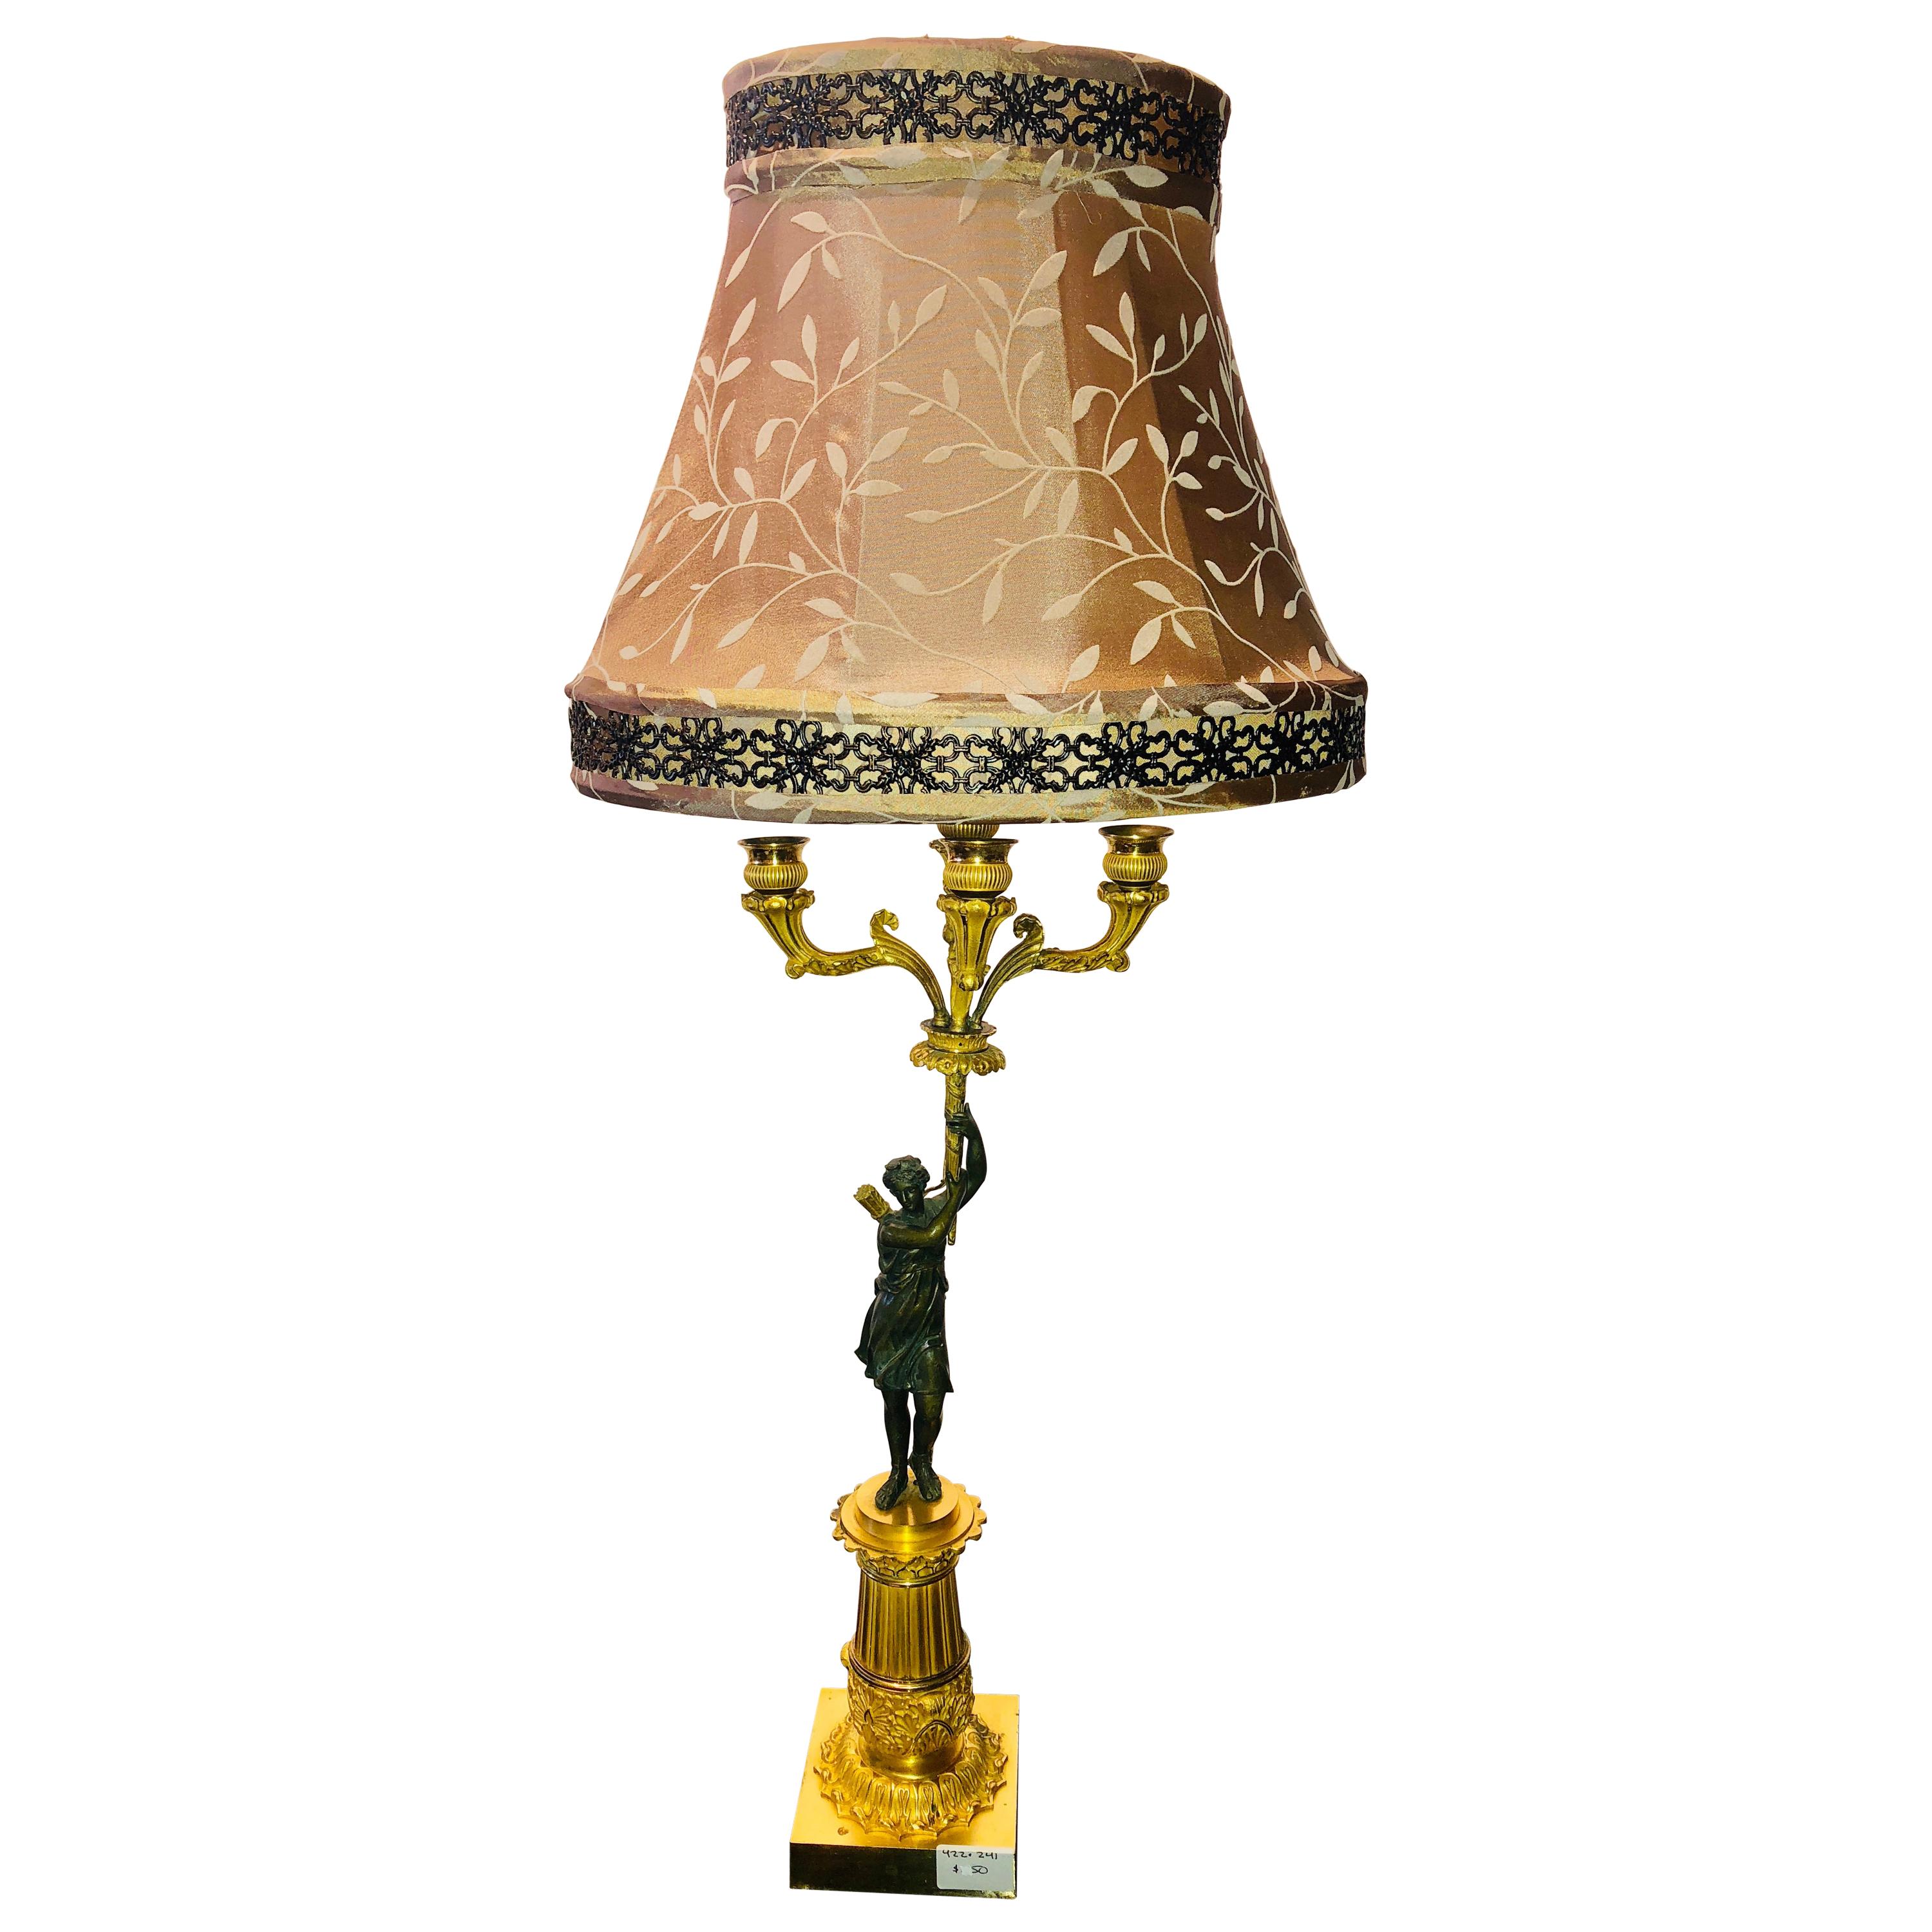 Empire Doré Bronze Candelabra Lamp Having a Patinated Woman Mounted as a Lamp